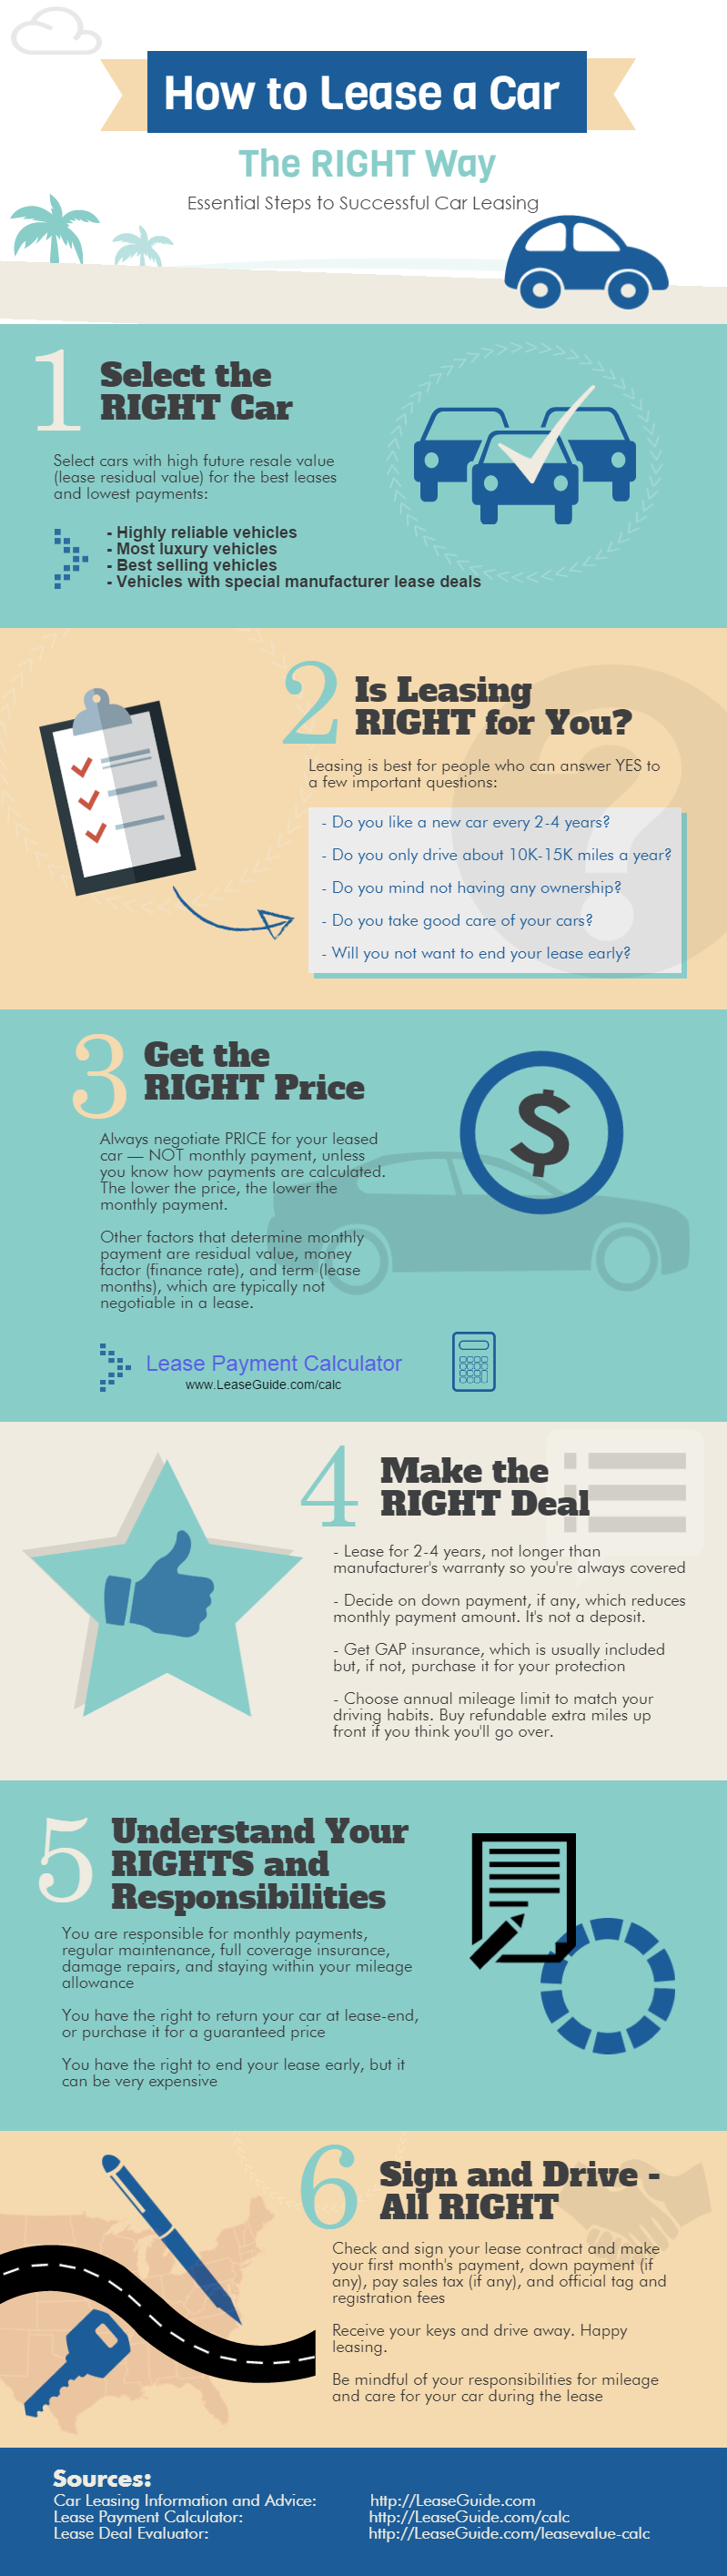 how-to-lease-a-car-infograph-by-leaseguide